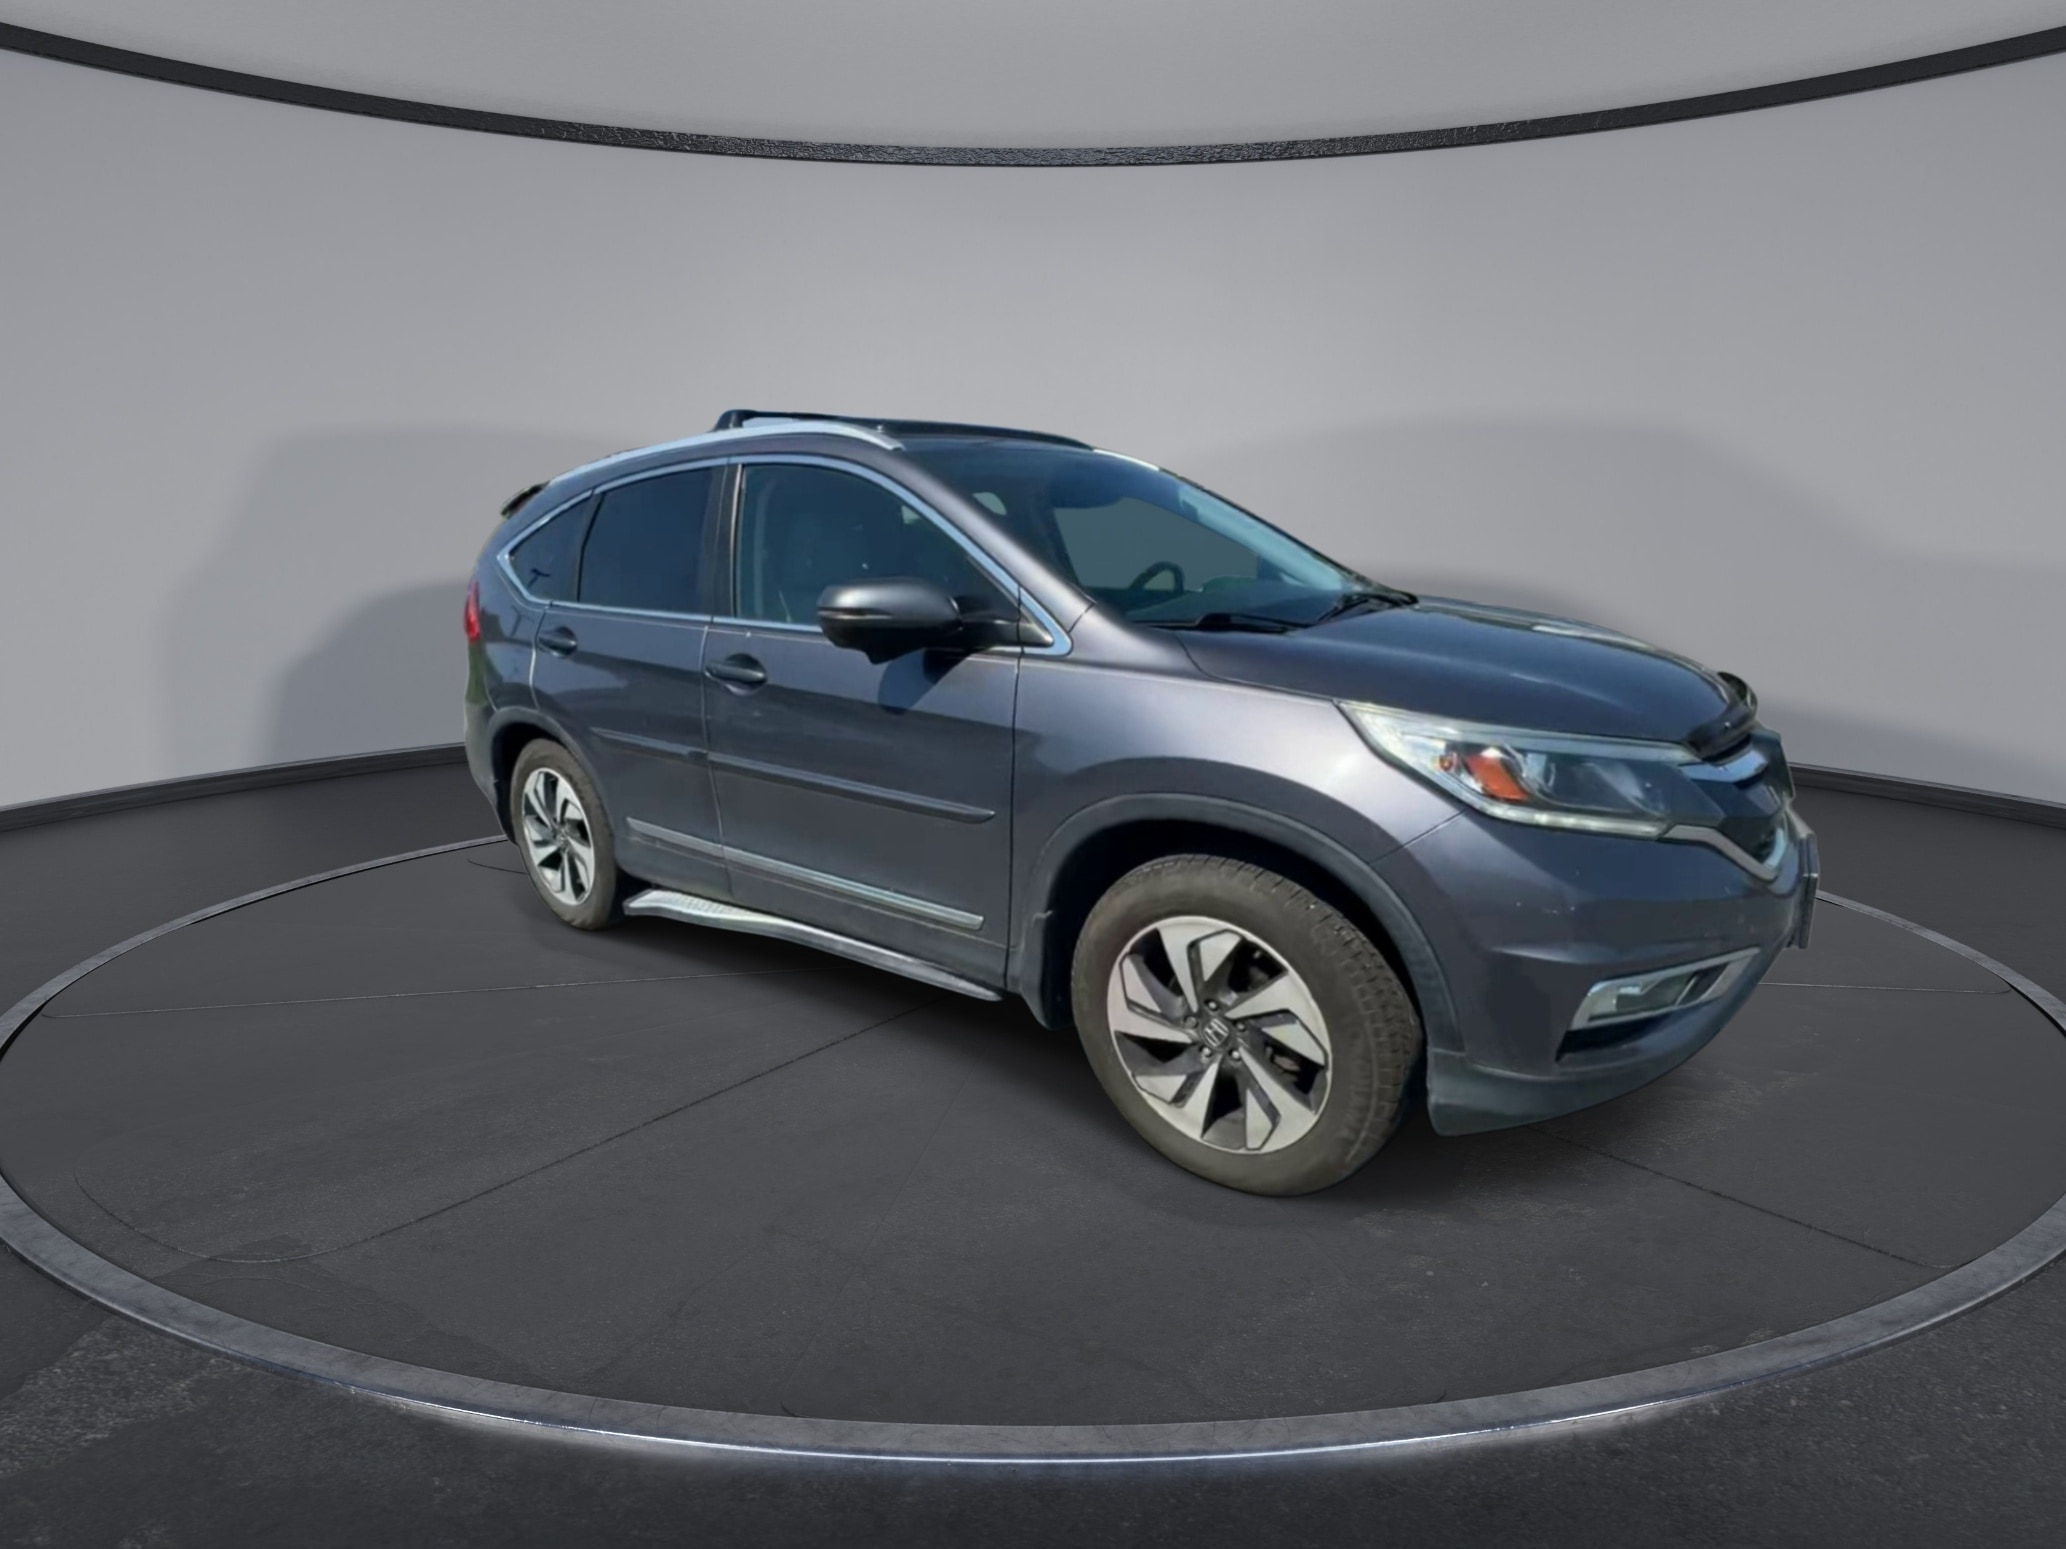 Used 2015 Honda CR-V Touring with VIN 5J6RM4H92FL012545 for sale in Berlin, VT